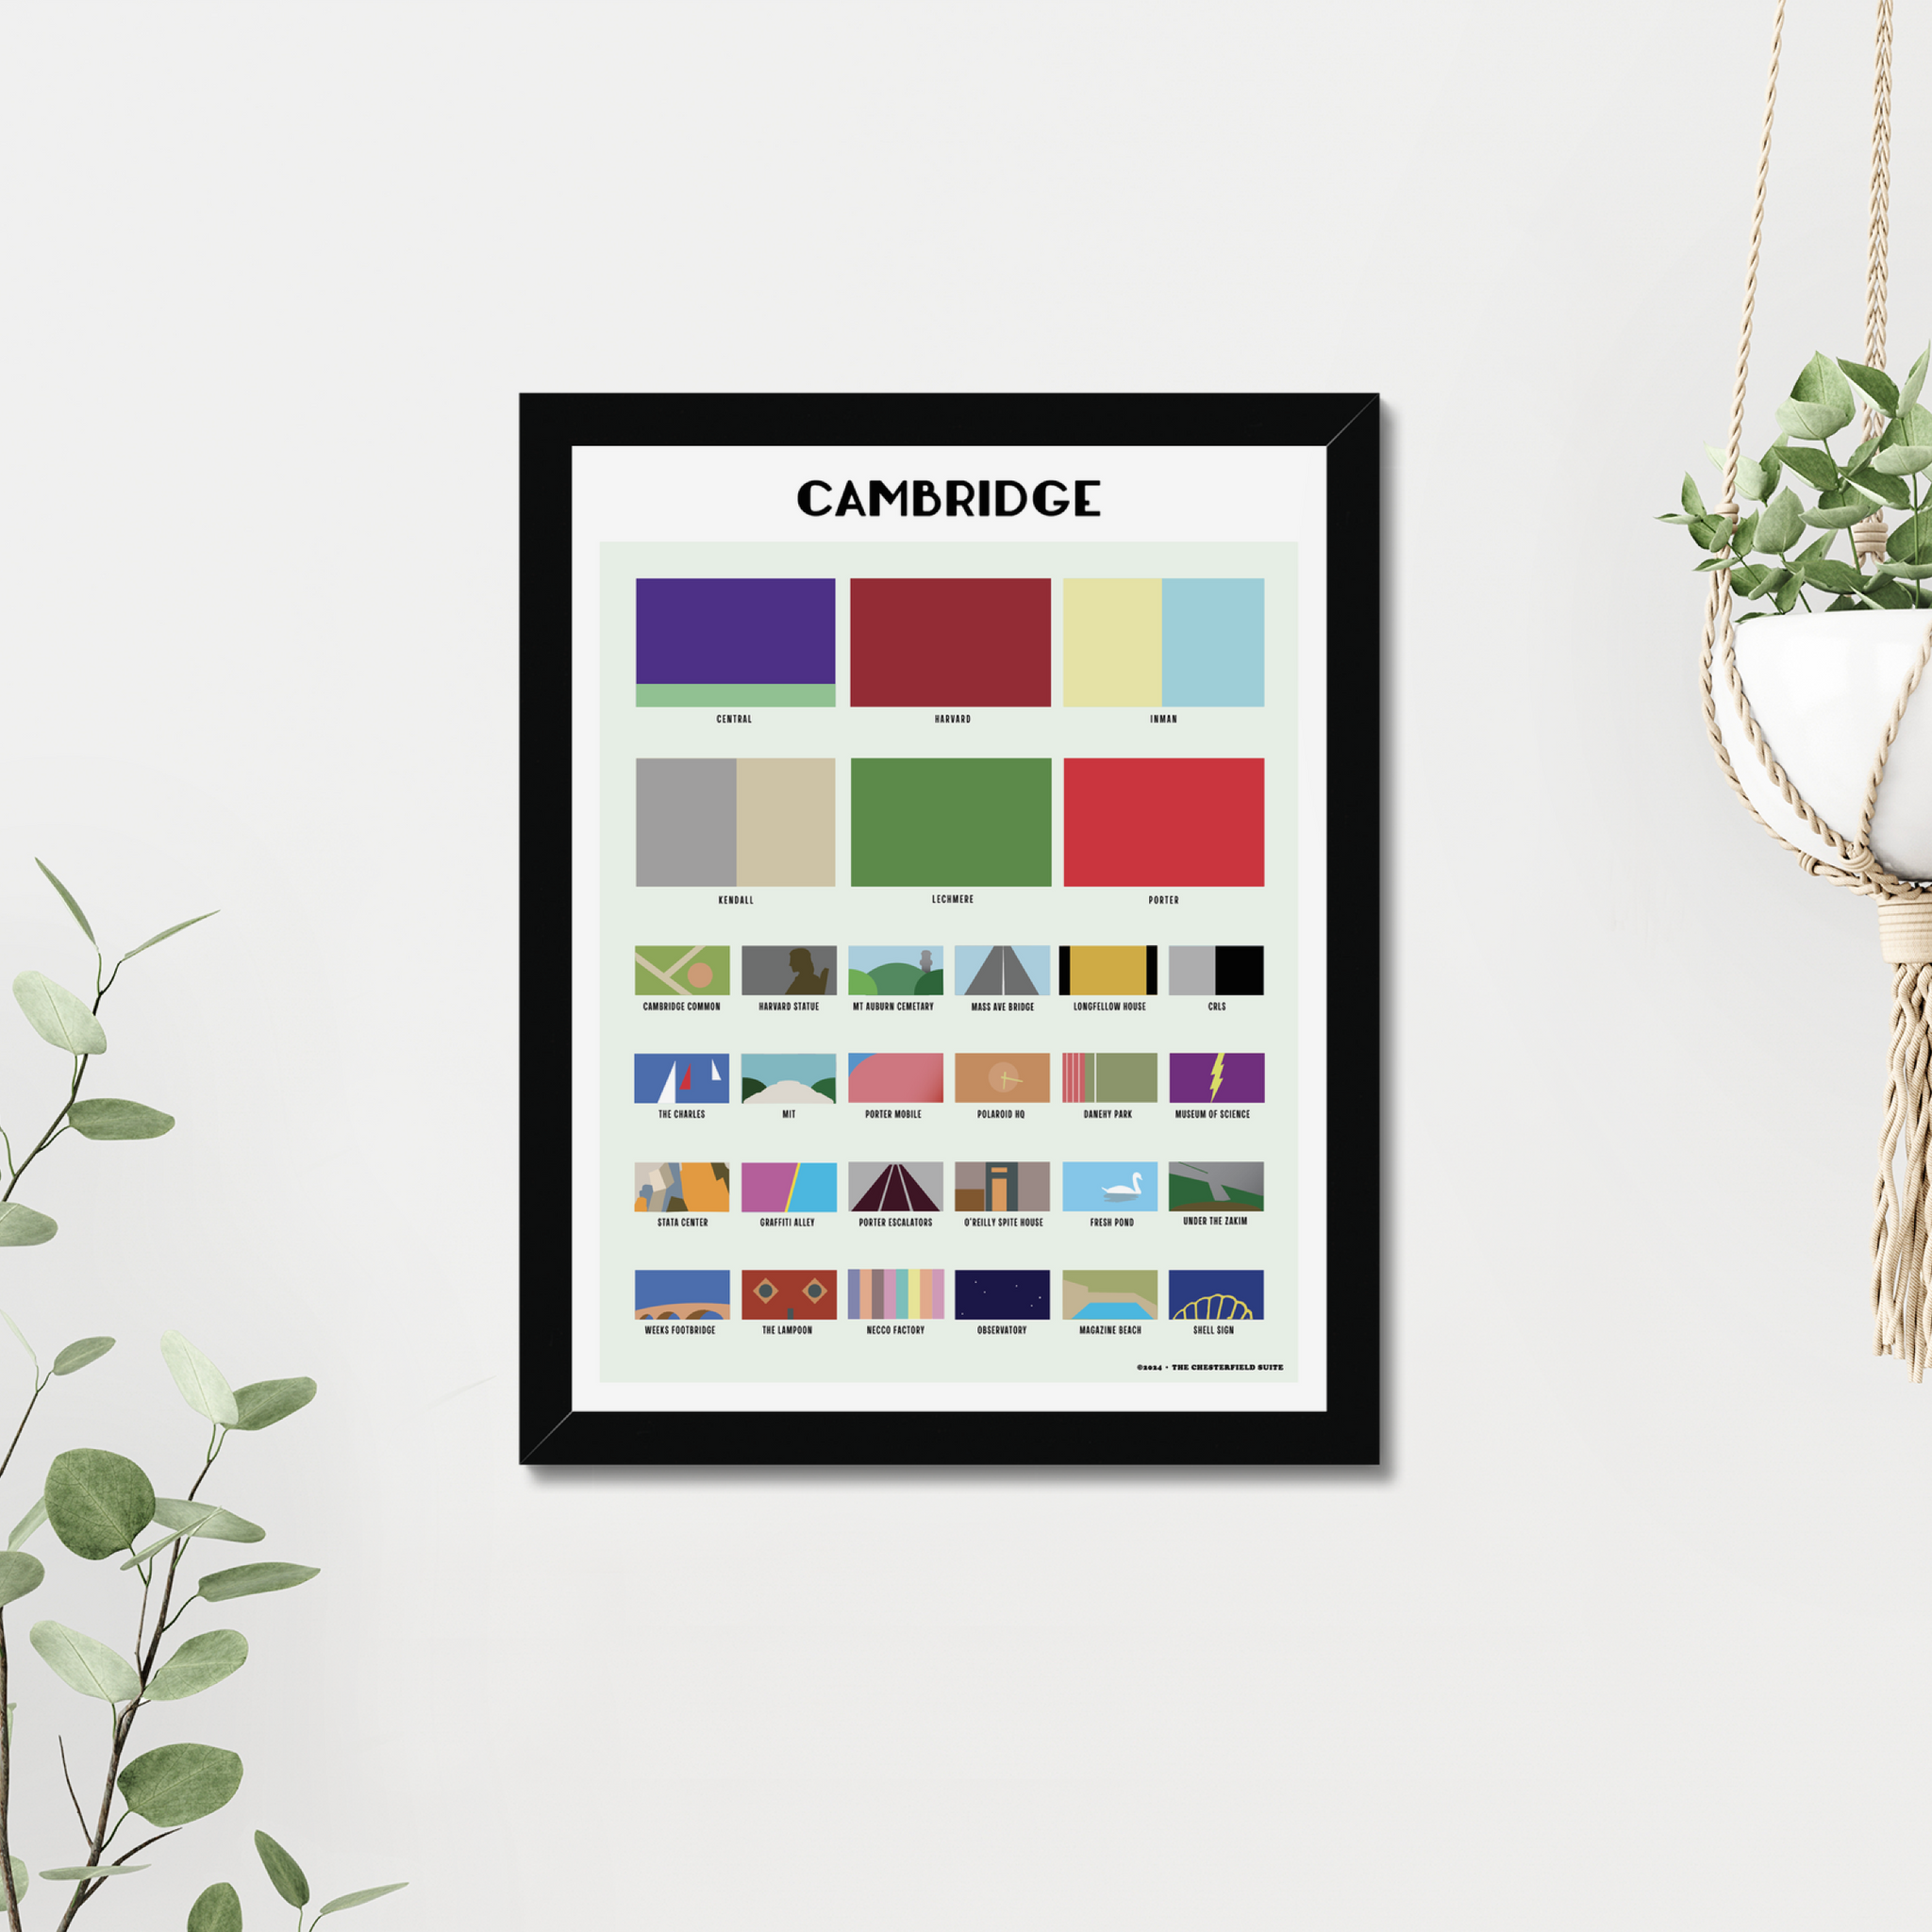 design of cambridge ma with blocks of color respresenting each neighborhood and attraction in a frame on a wall